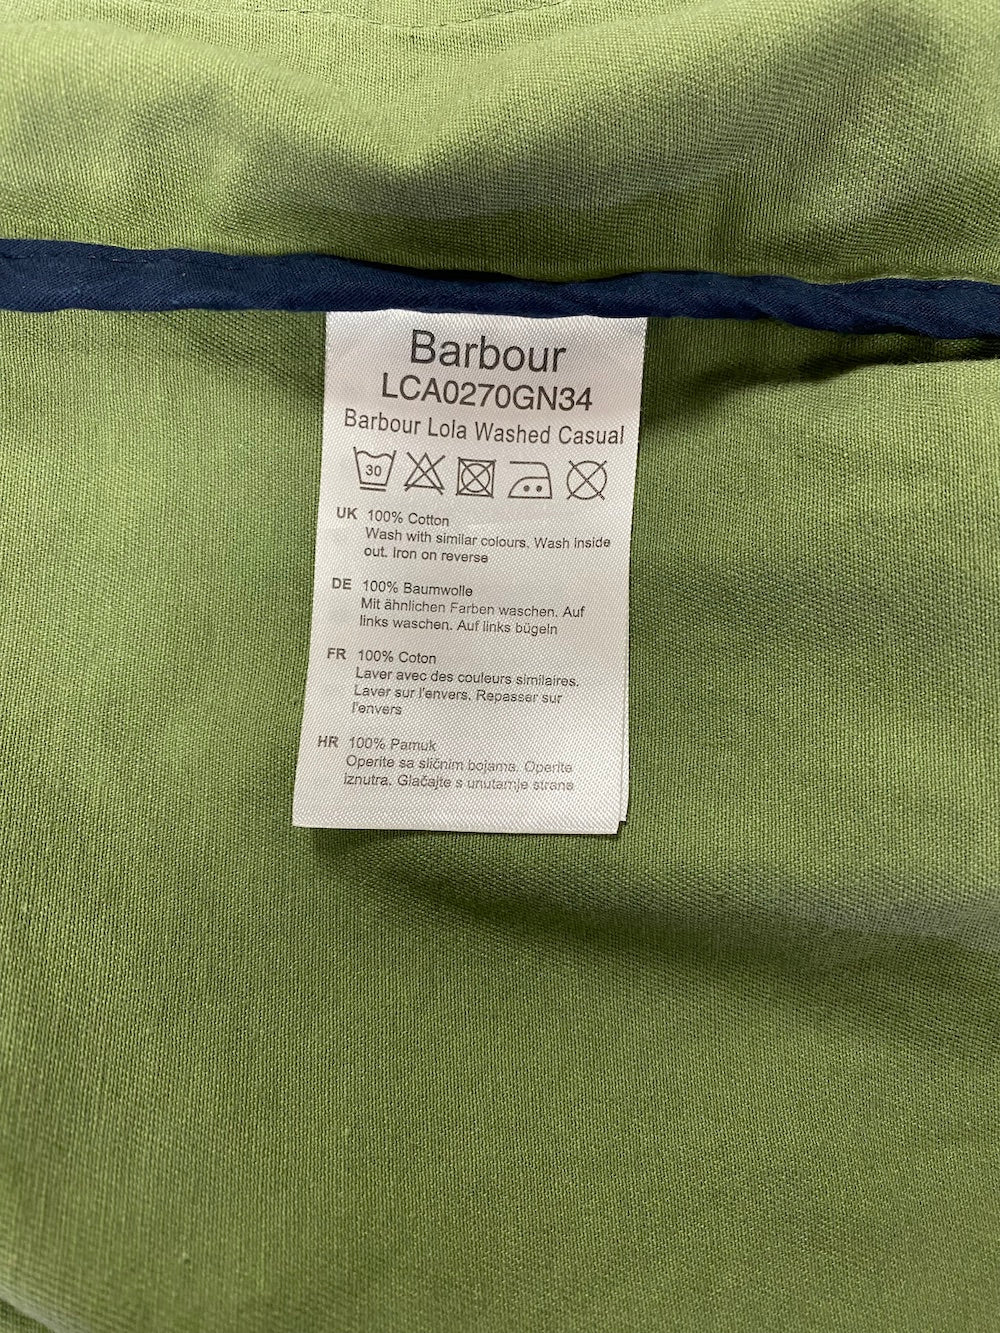 Barbour Women's Lola Washed Casual